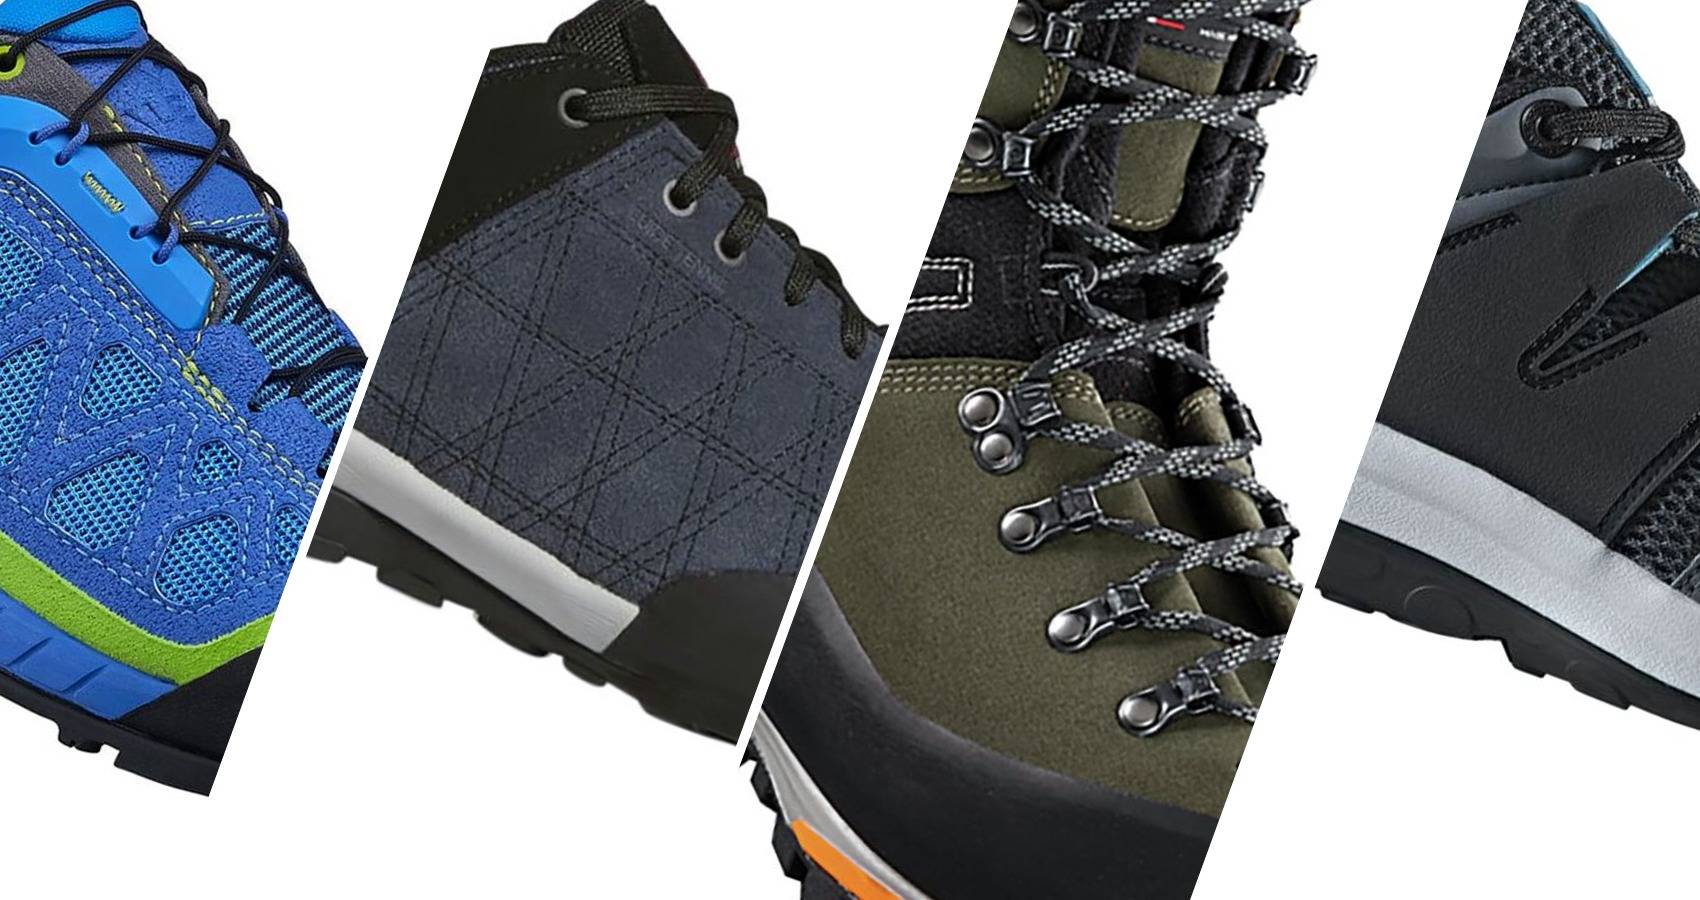 Best 5 inexpensive Climbing Footwear for Man in 2019